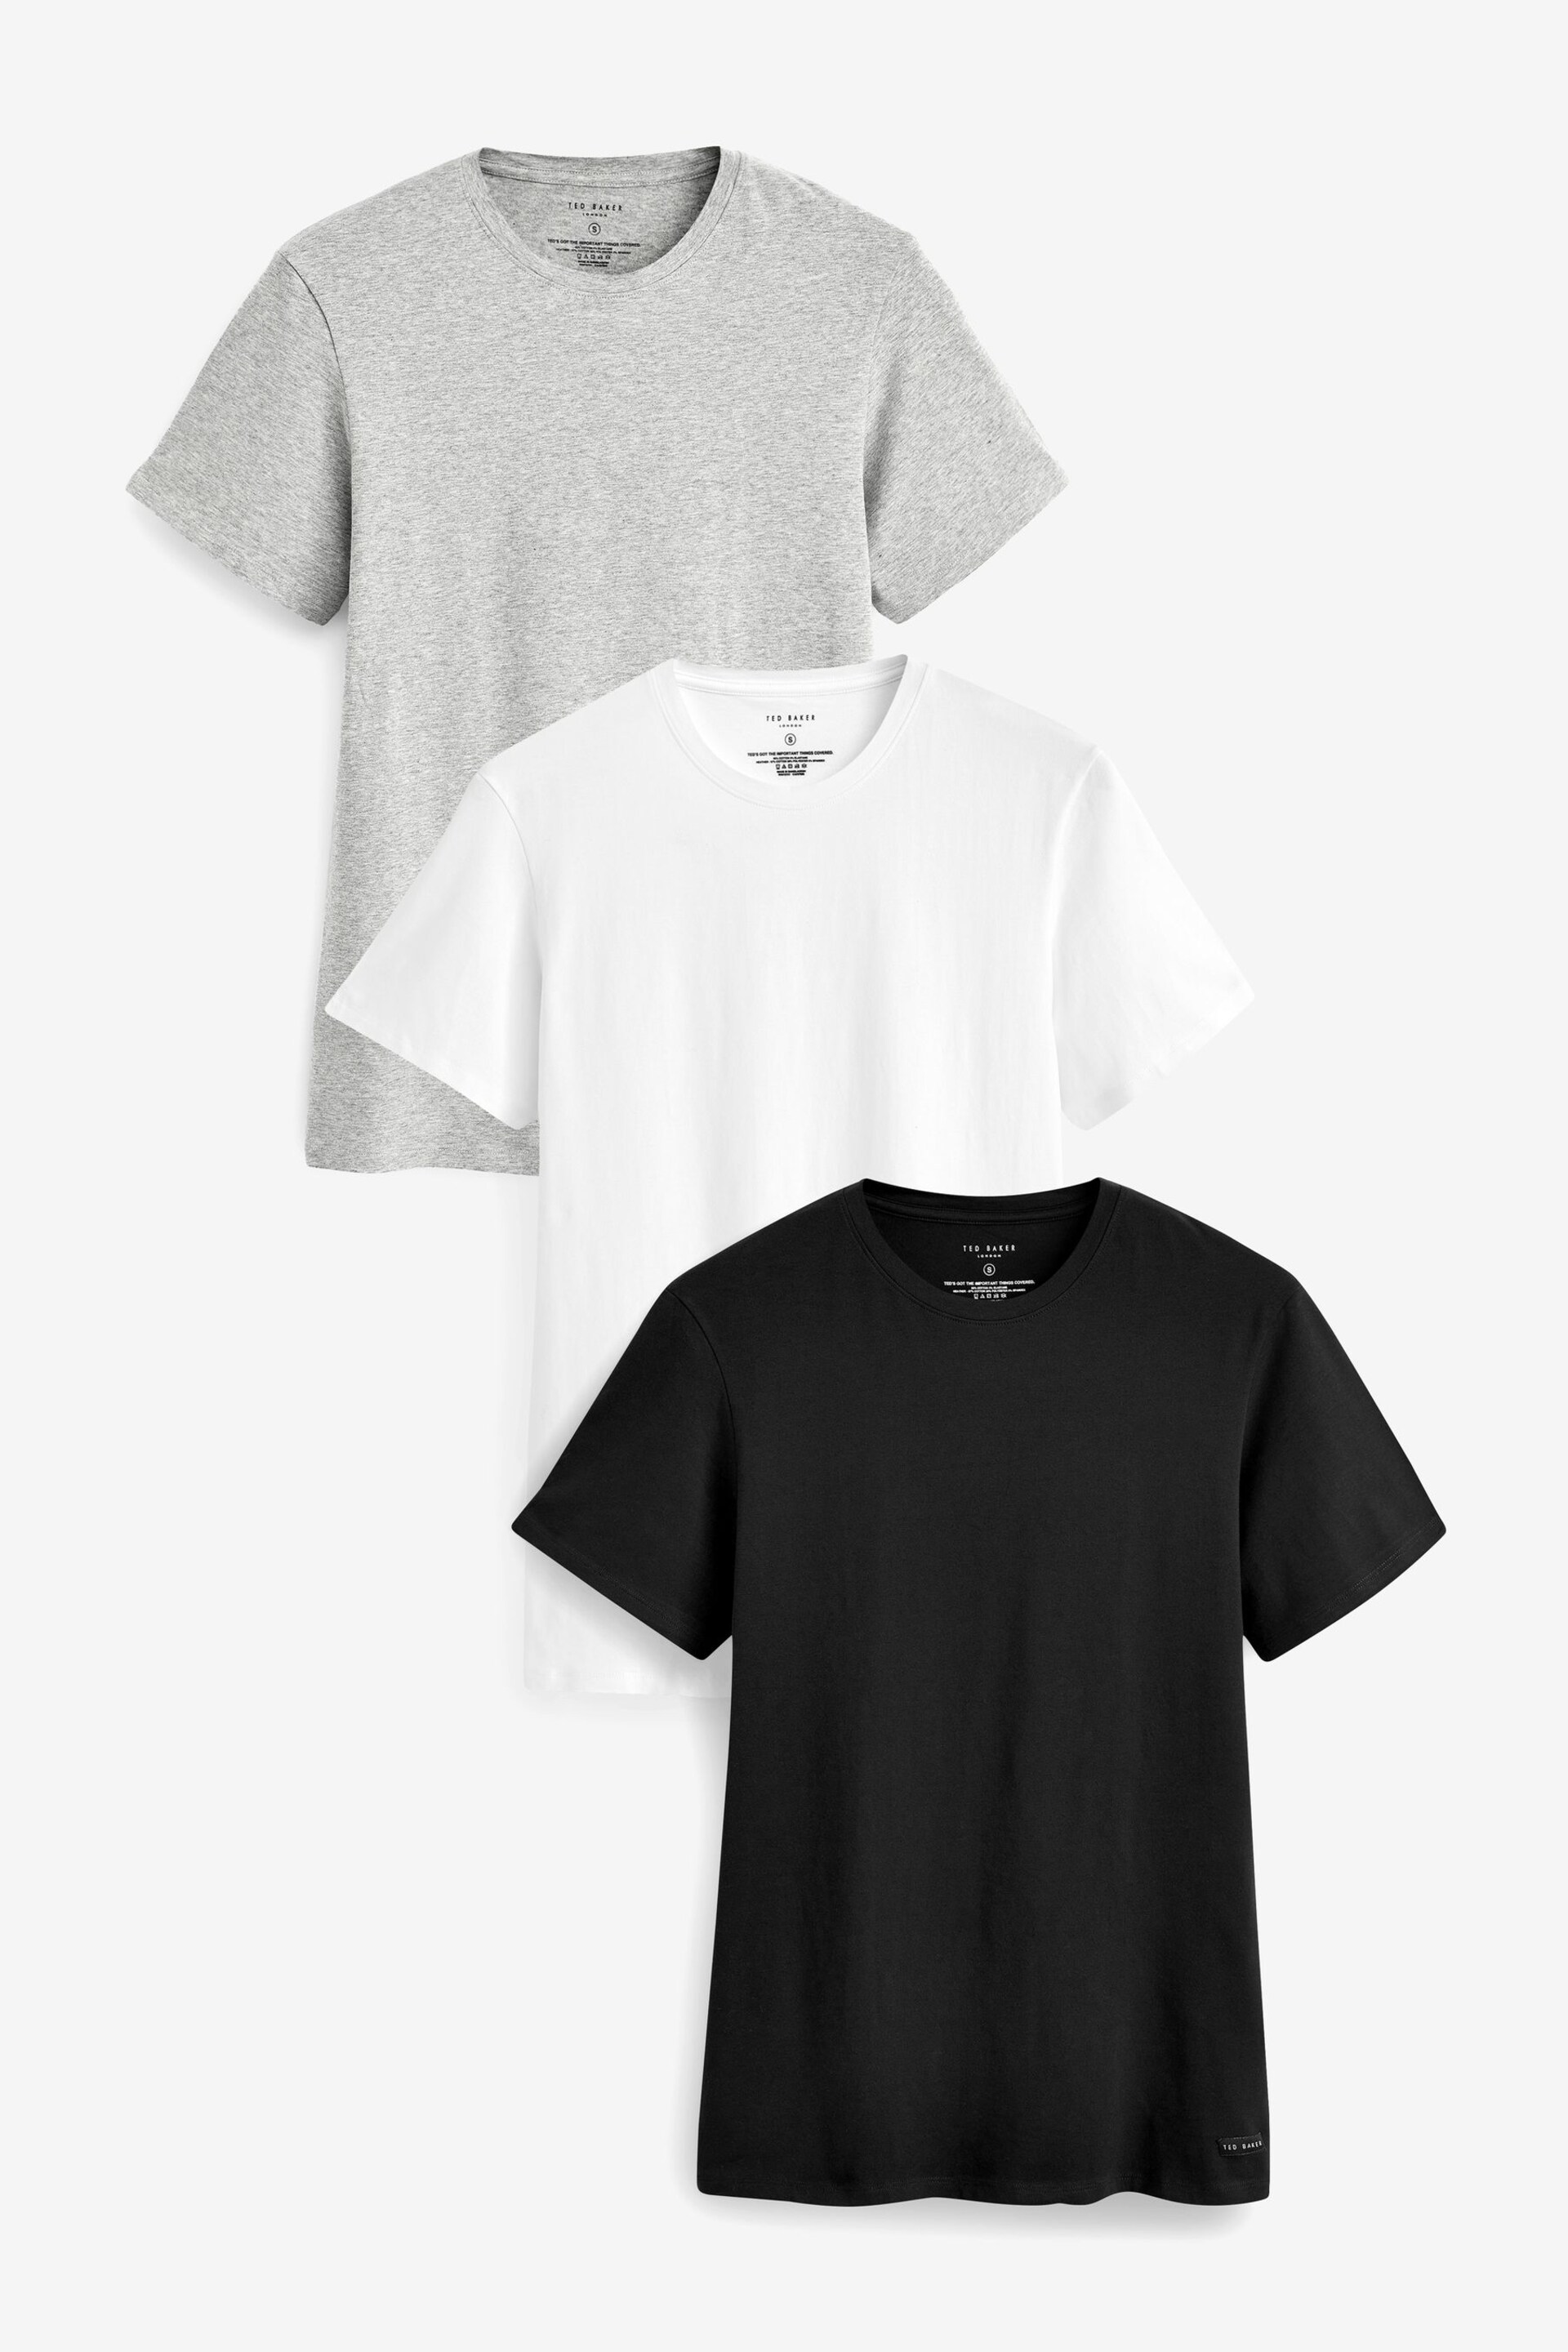 Ted Baker Grey Crew Neck T-Shirts 3 Pack - Image 1 of 9